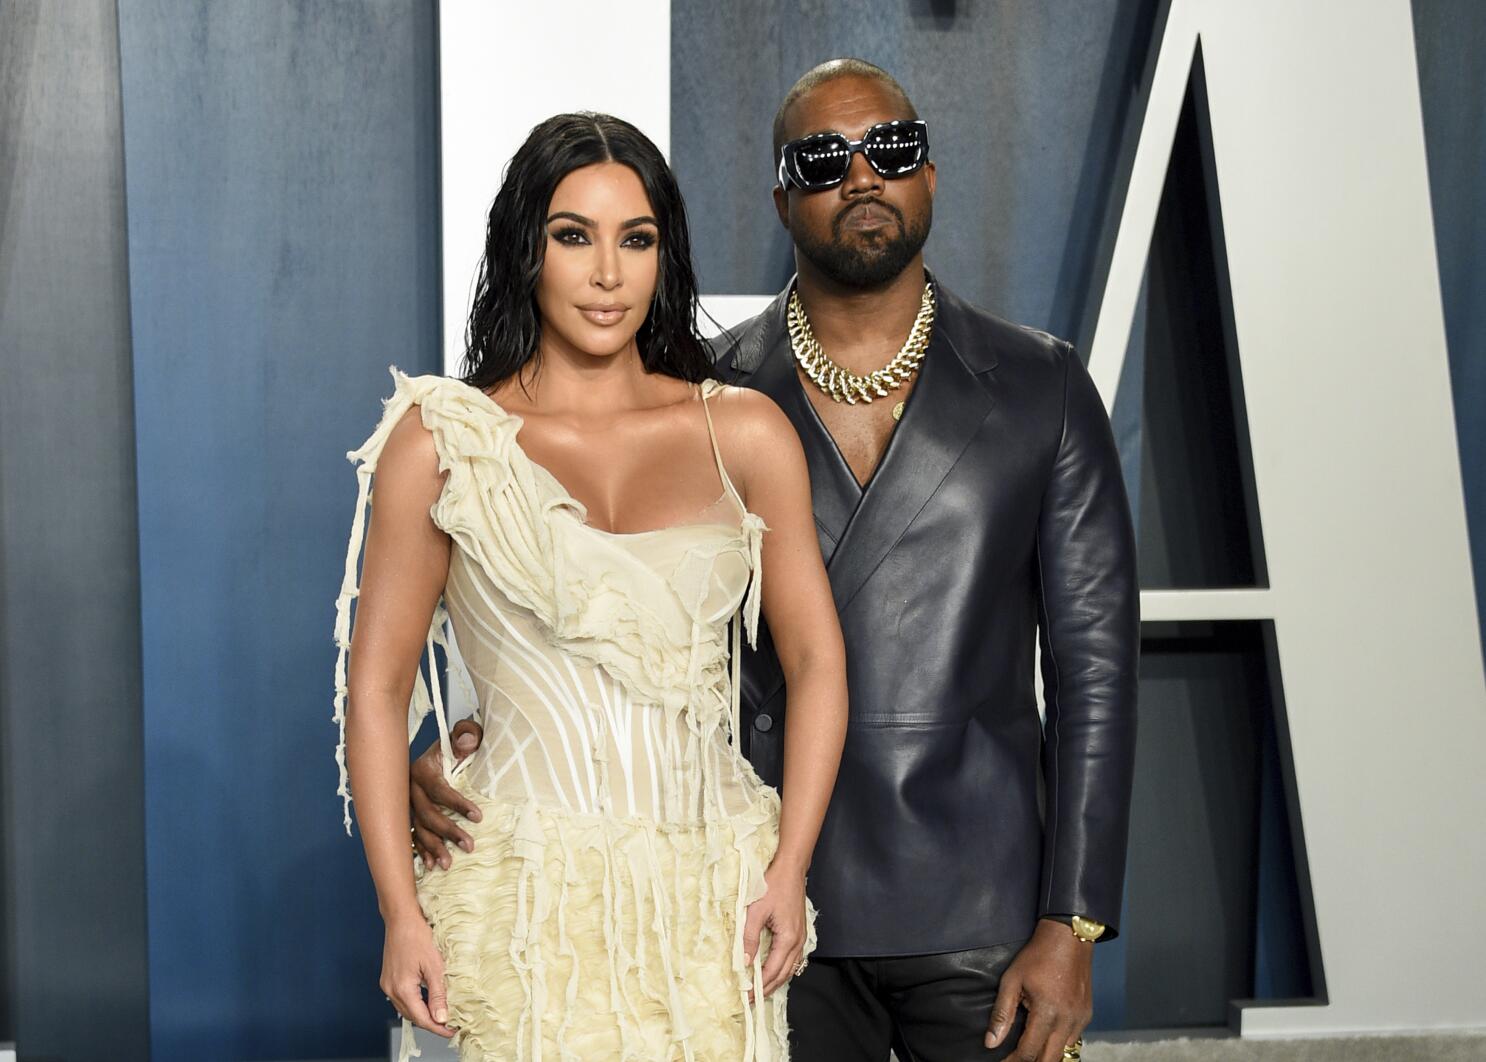 Kim Kardashian and Kanye West divorce details: What's really going